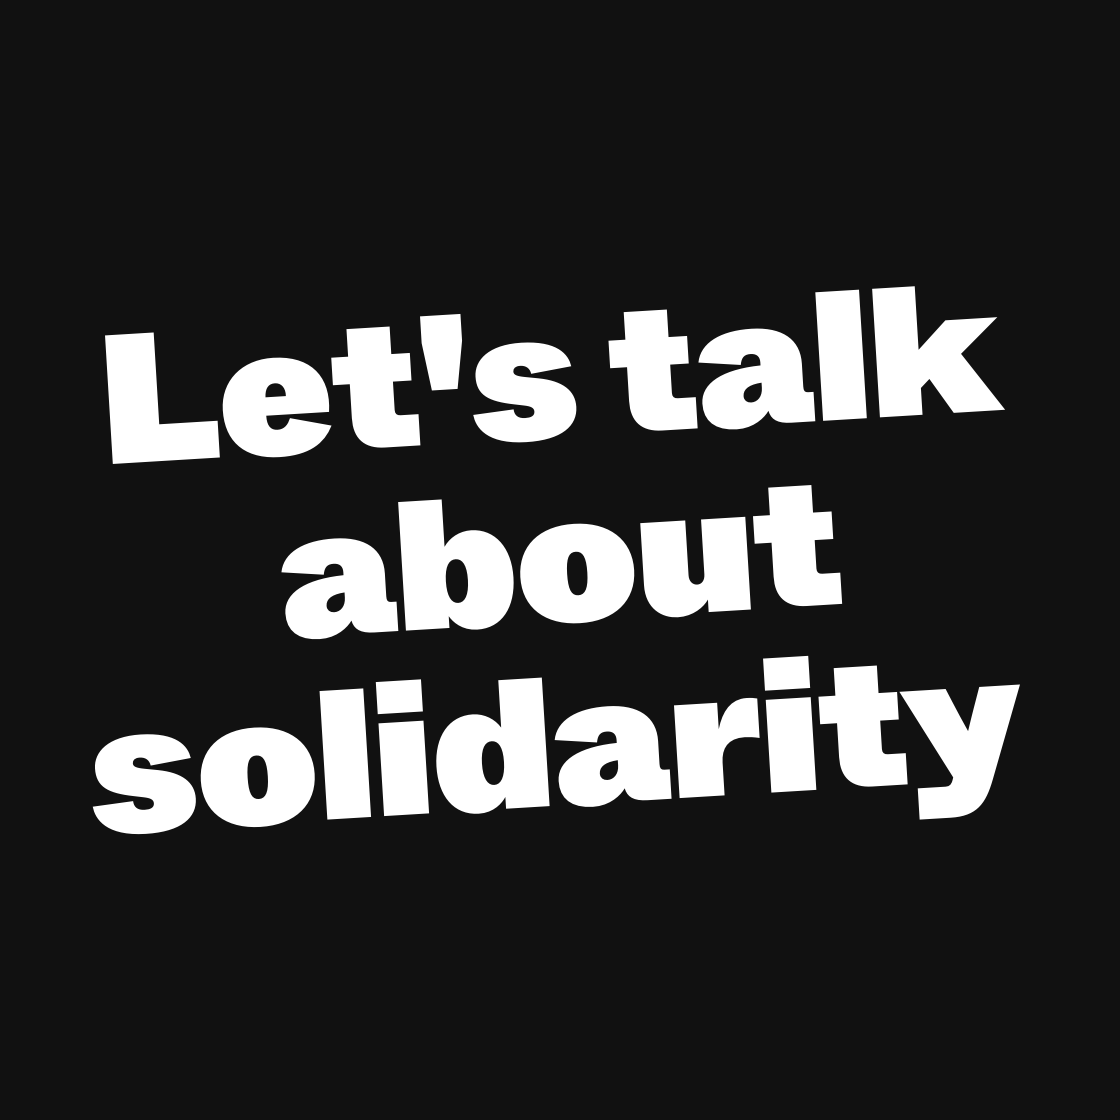 Let’s talk about solidarity